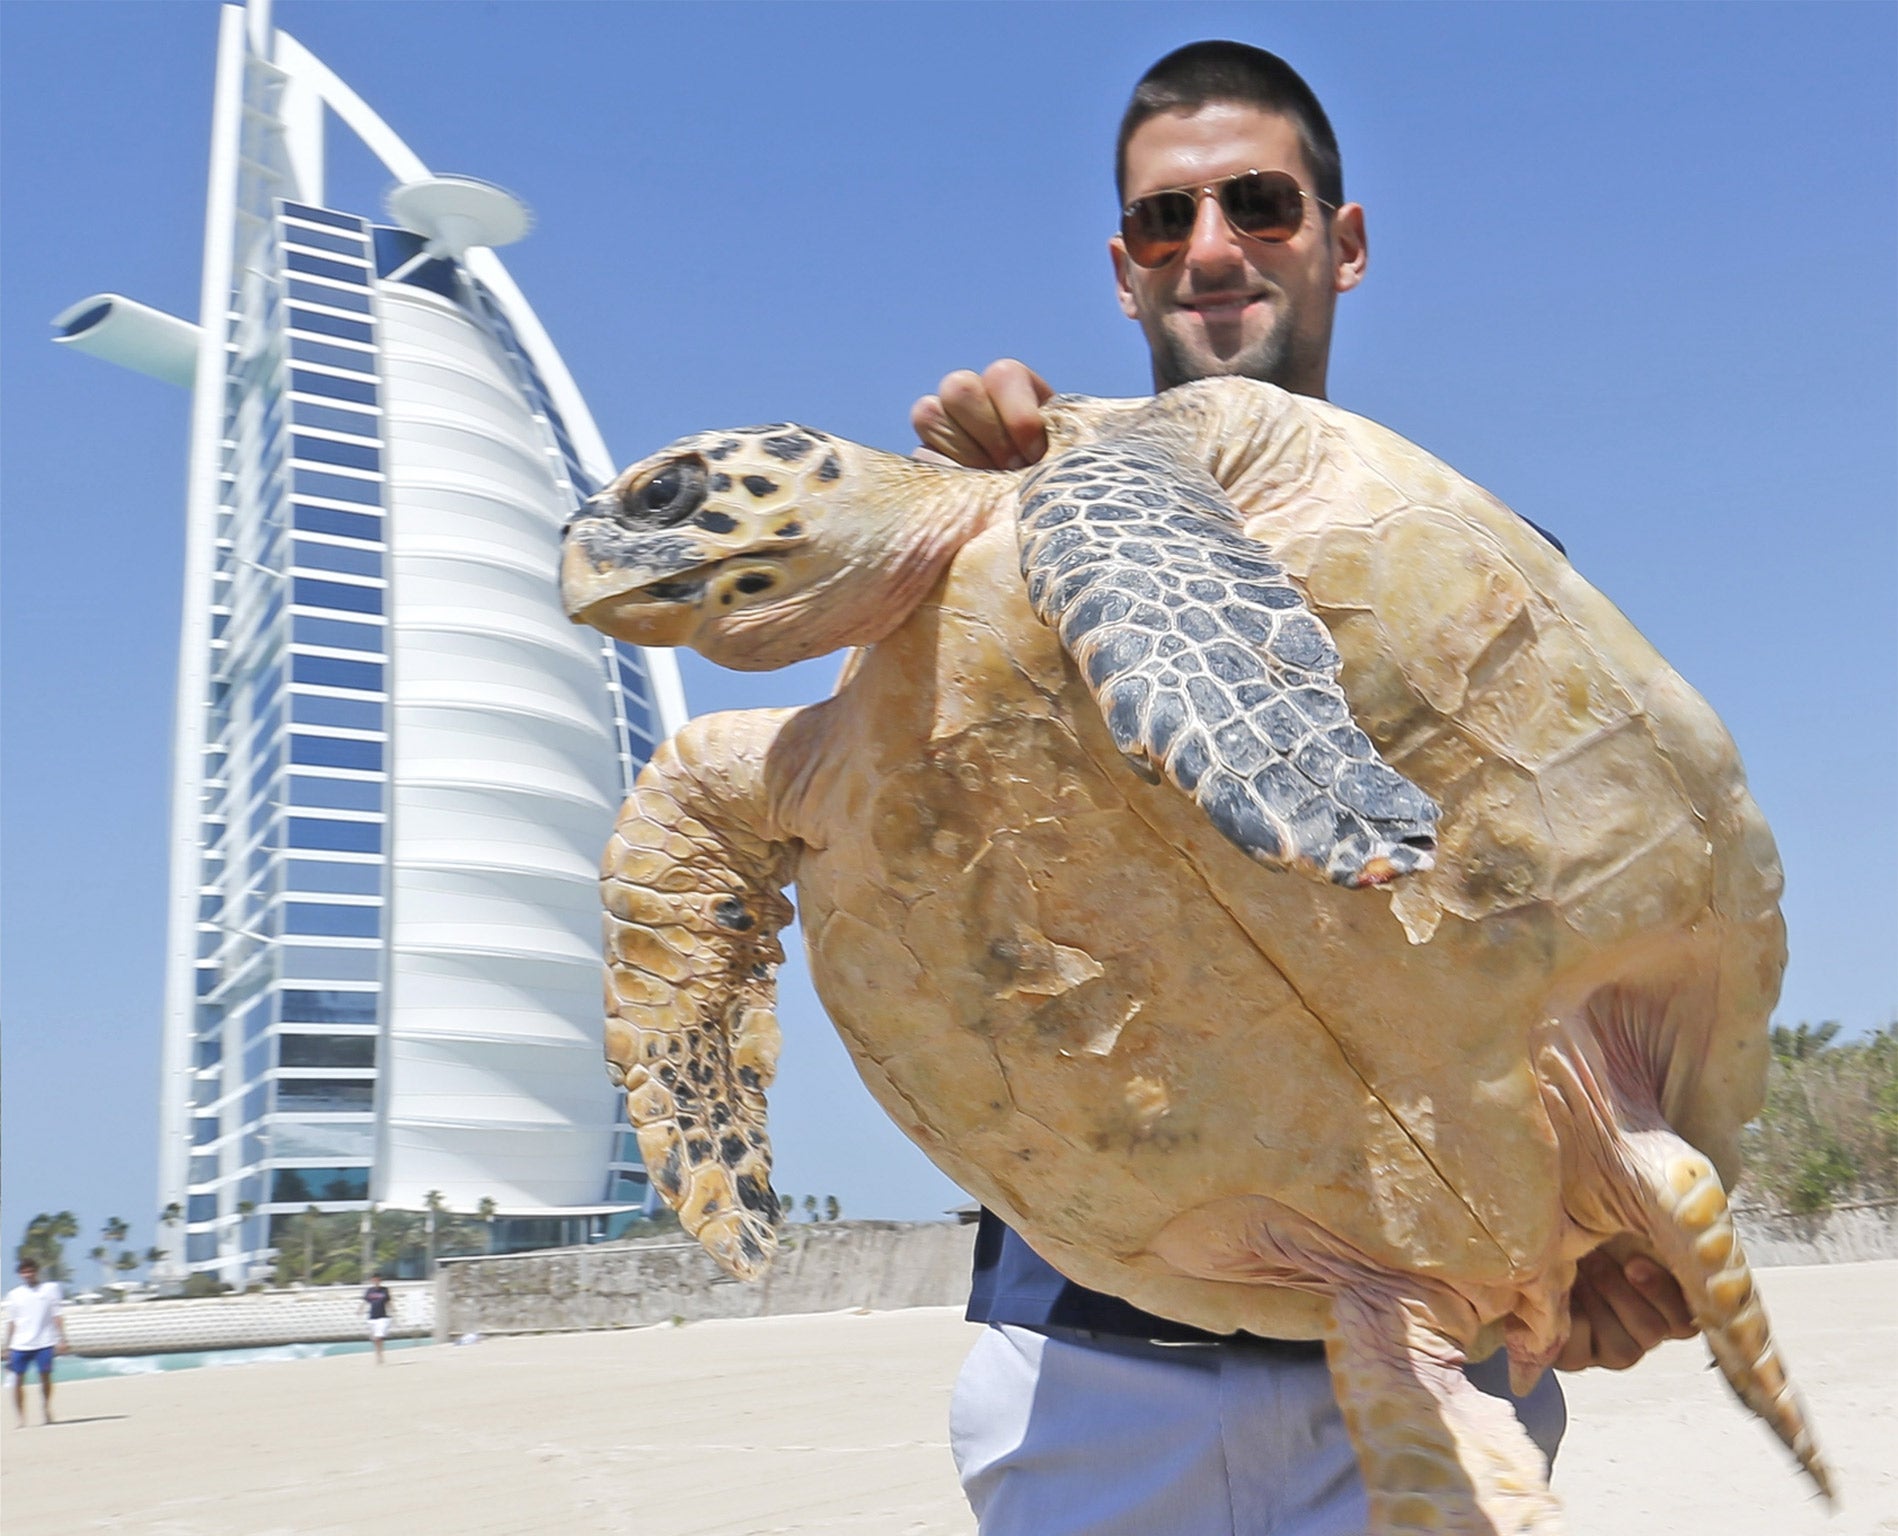 Relaxed Novak Djokovic poses with a hawksbill sea turtle in Dubai